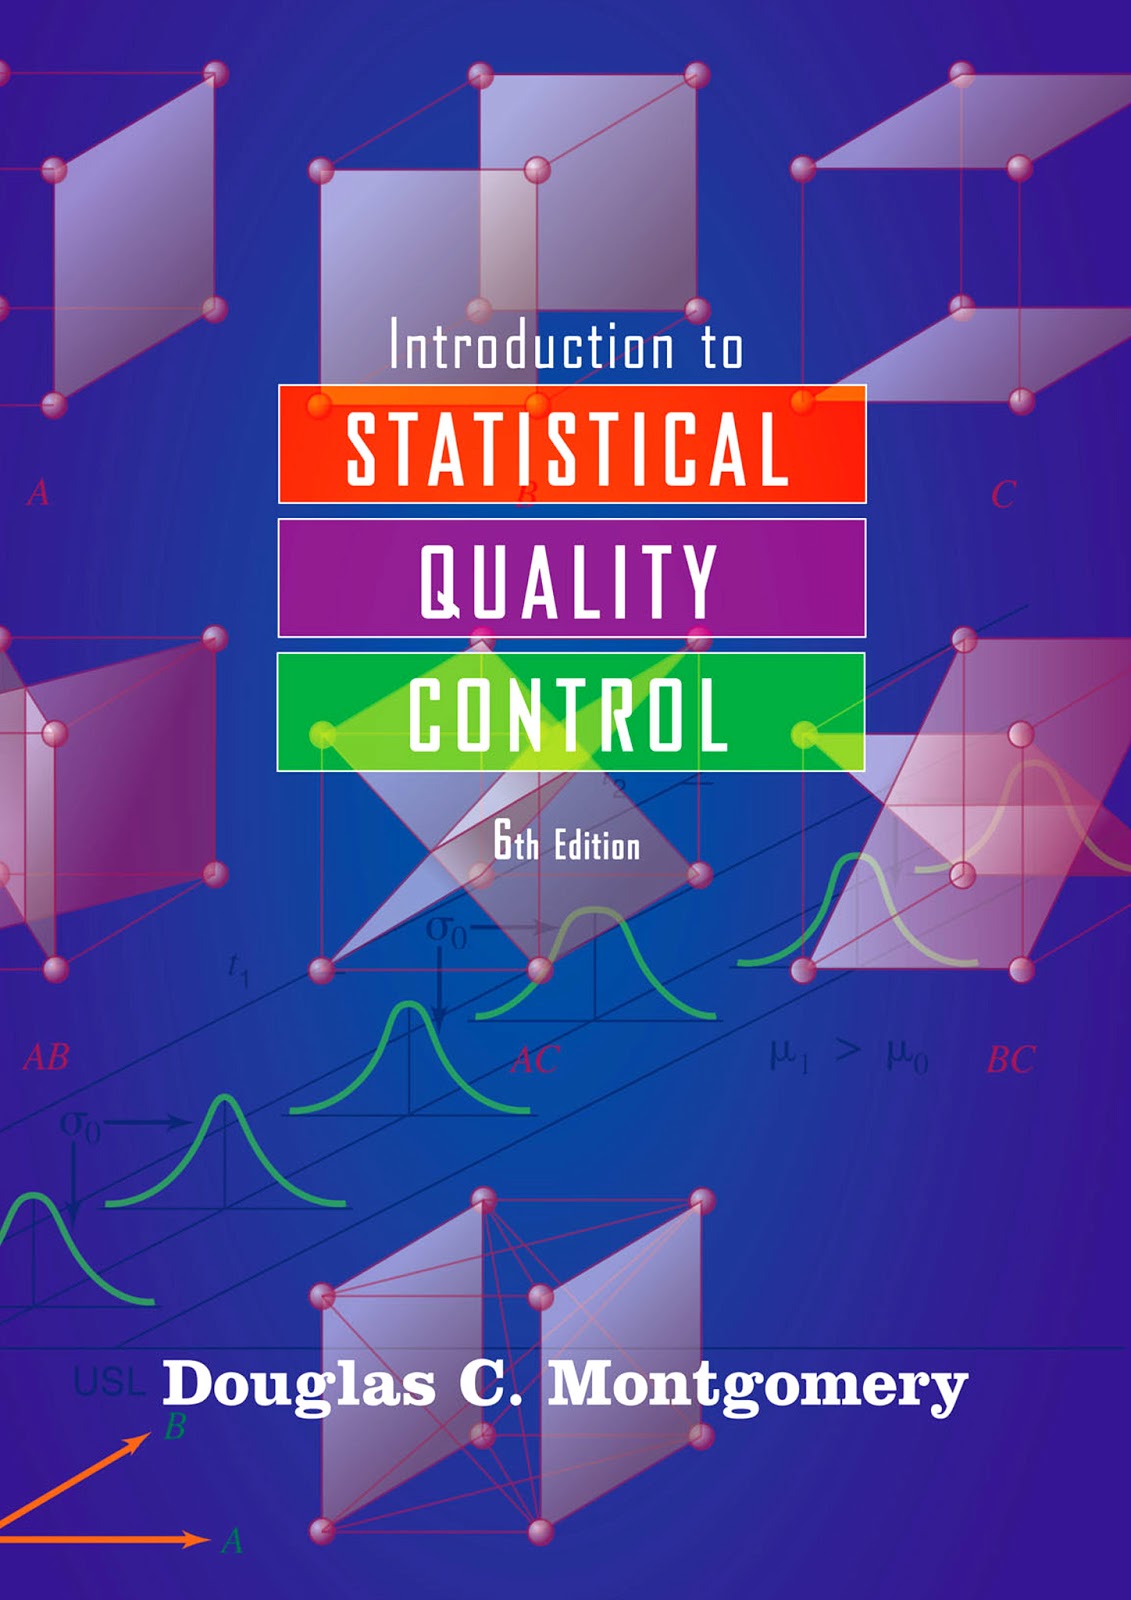 Introduction to Statistical Quality Control by Douglas C. Montgomery 6th Edition Free eBooks